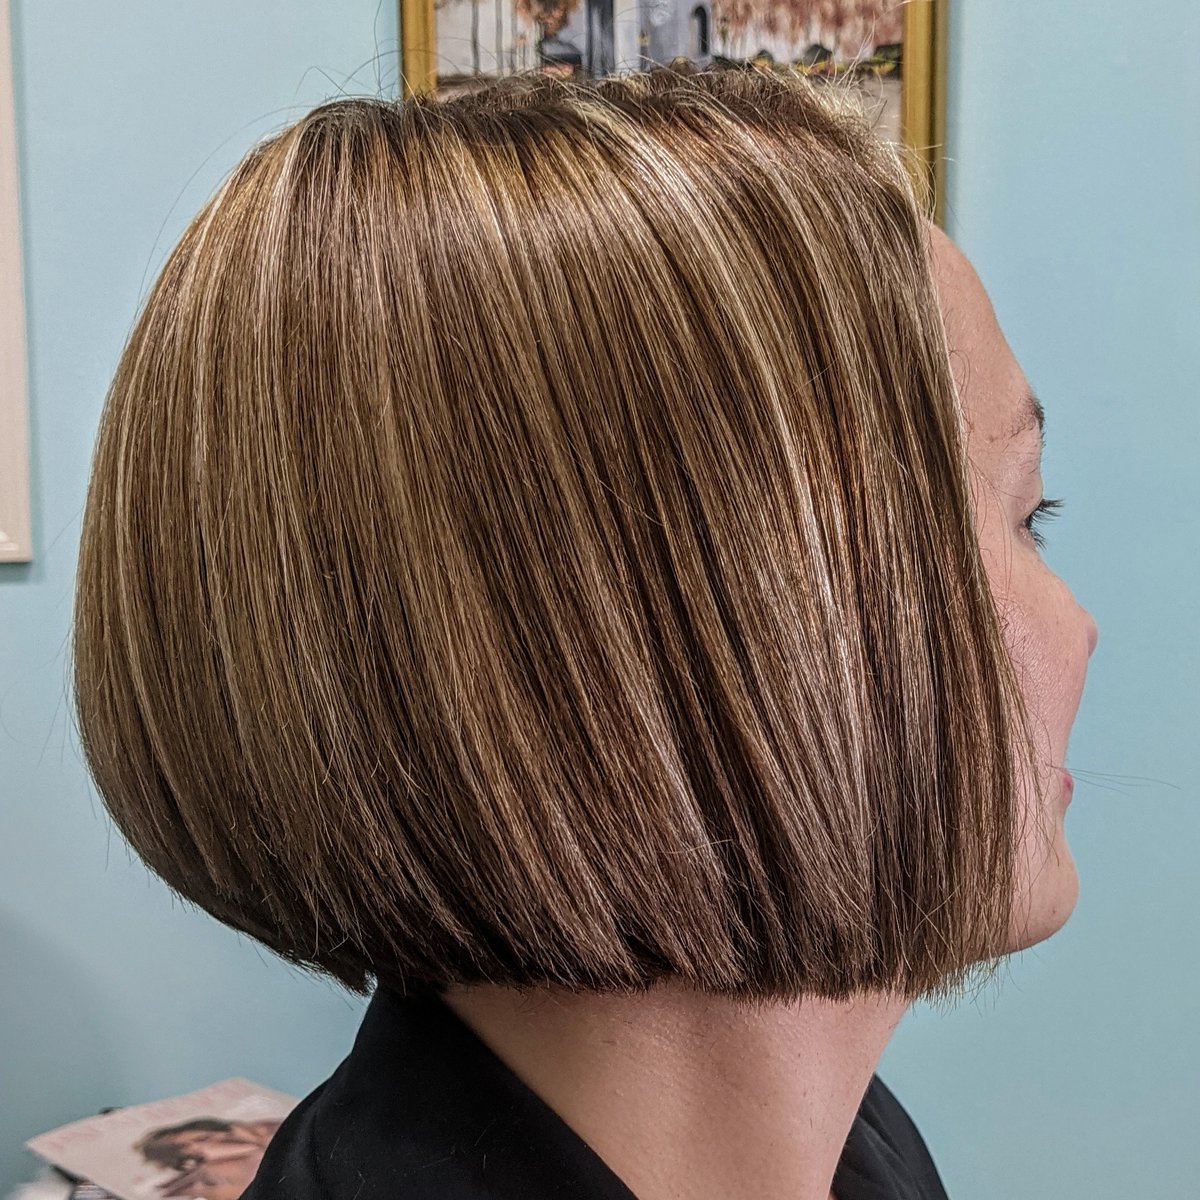 Prepare to turn heads with a flawless, straight and sleek cut today.
-
#PalmBeachHair #HairSalonPalmBeach #PalmBeachHairstylist
#PalmBeachBeauty #HairColorPalmBeach #PalmBeachSpa
#PalmBeachGlam #PalmBeachBlonde #HairExtensionsPalmBeach
#PalmBeachHaircut